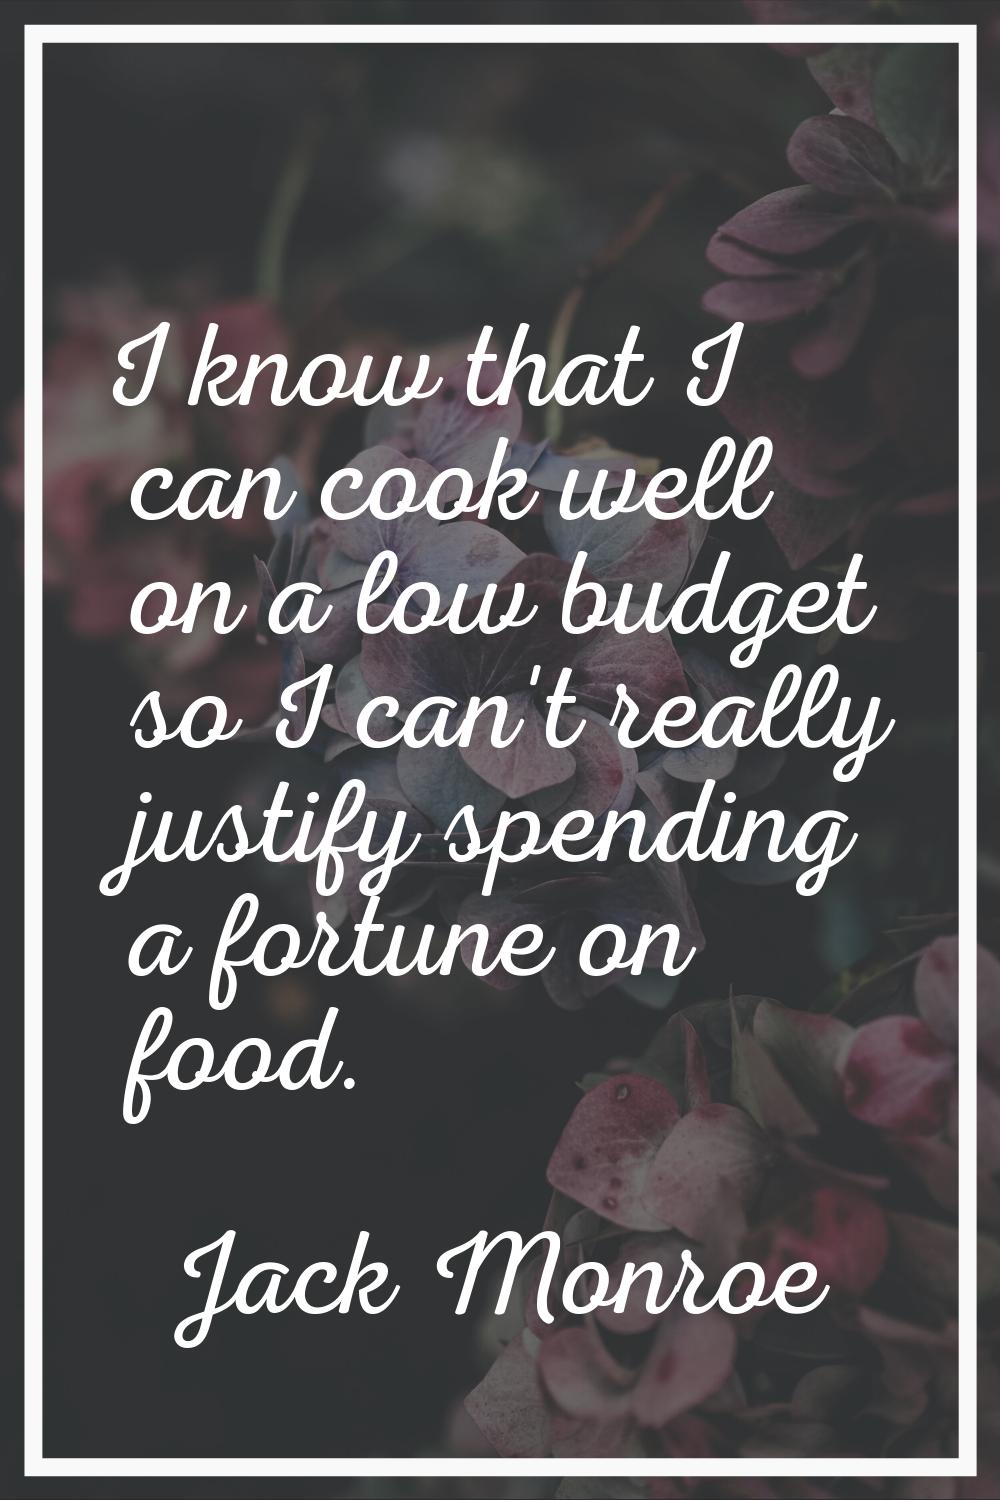 I know that I can cook well on a low budget so I can't really justify spending a fortune on food.